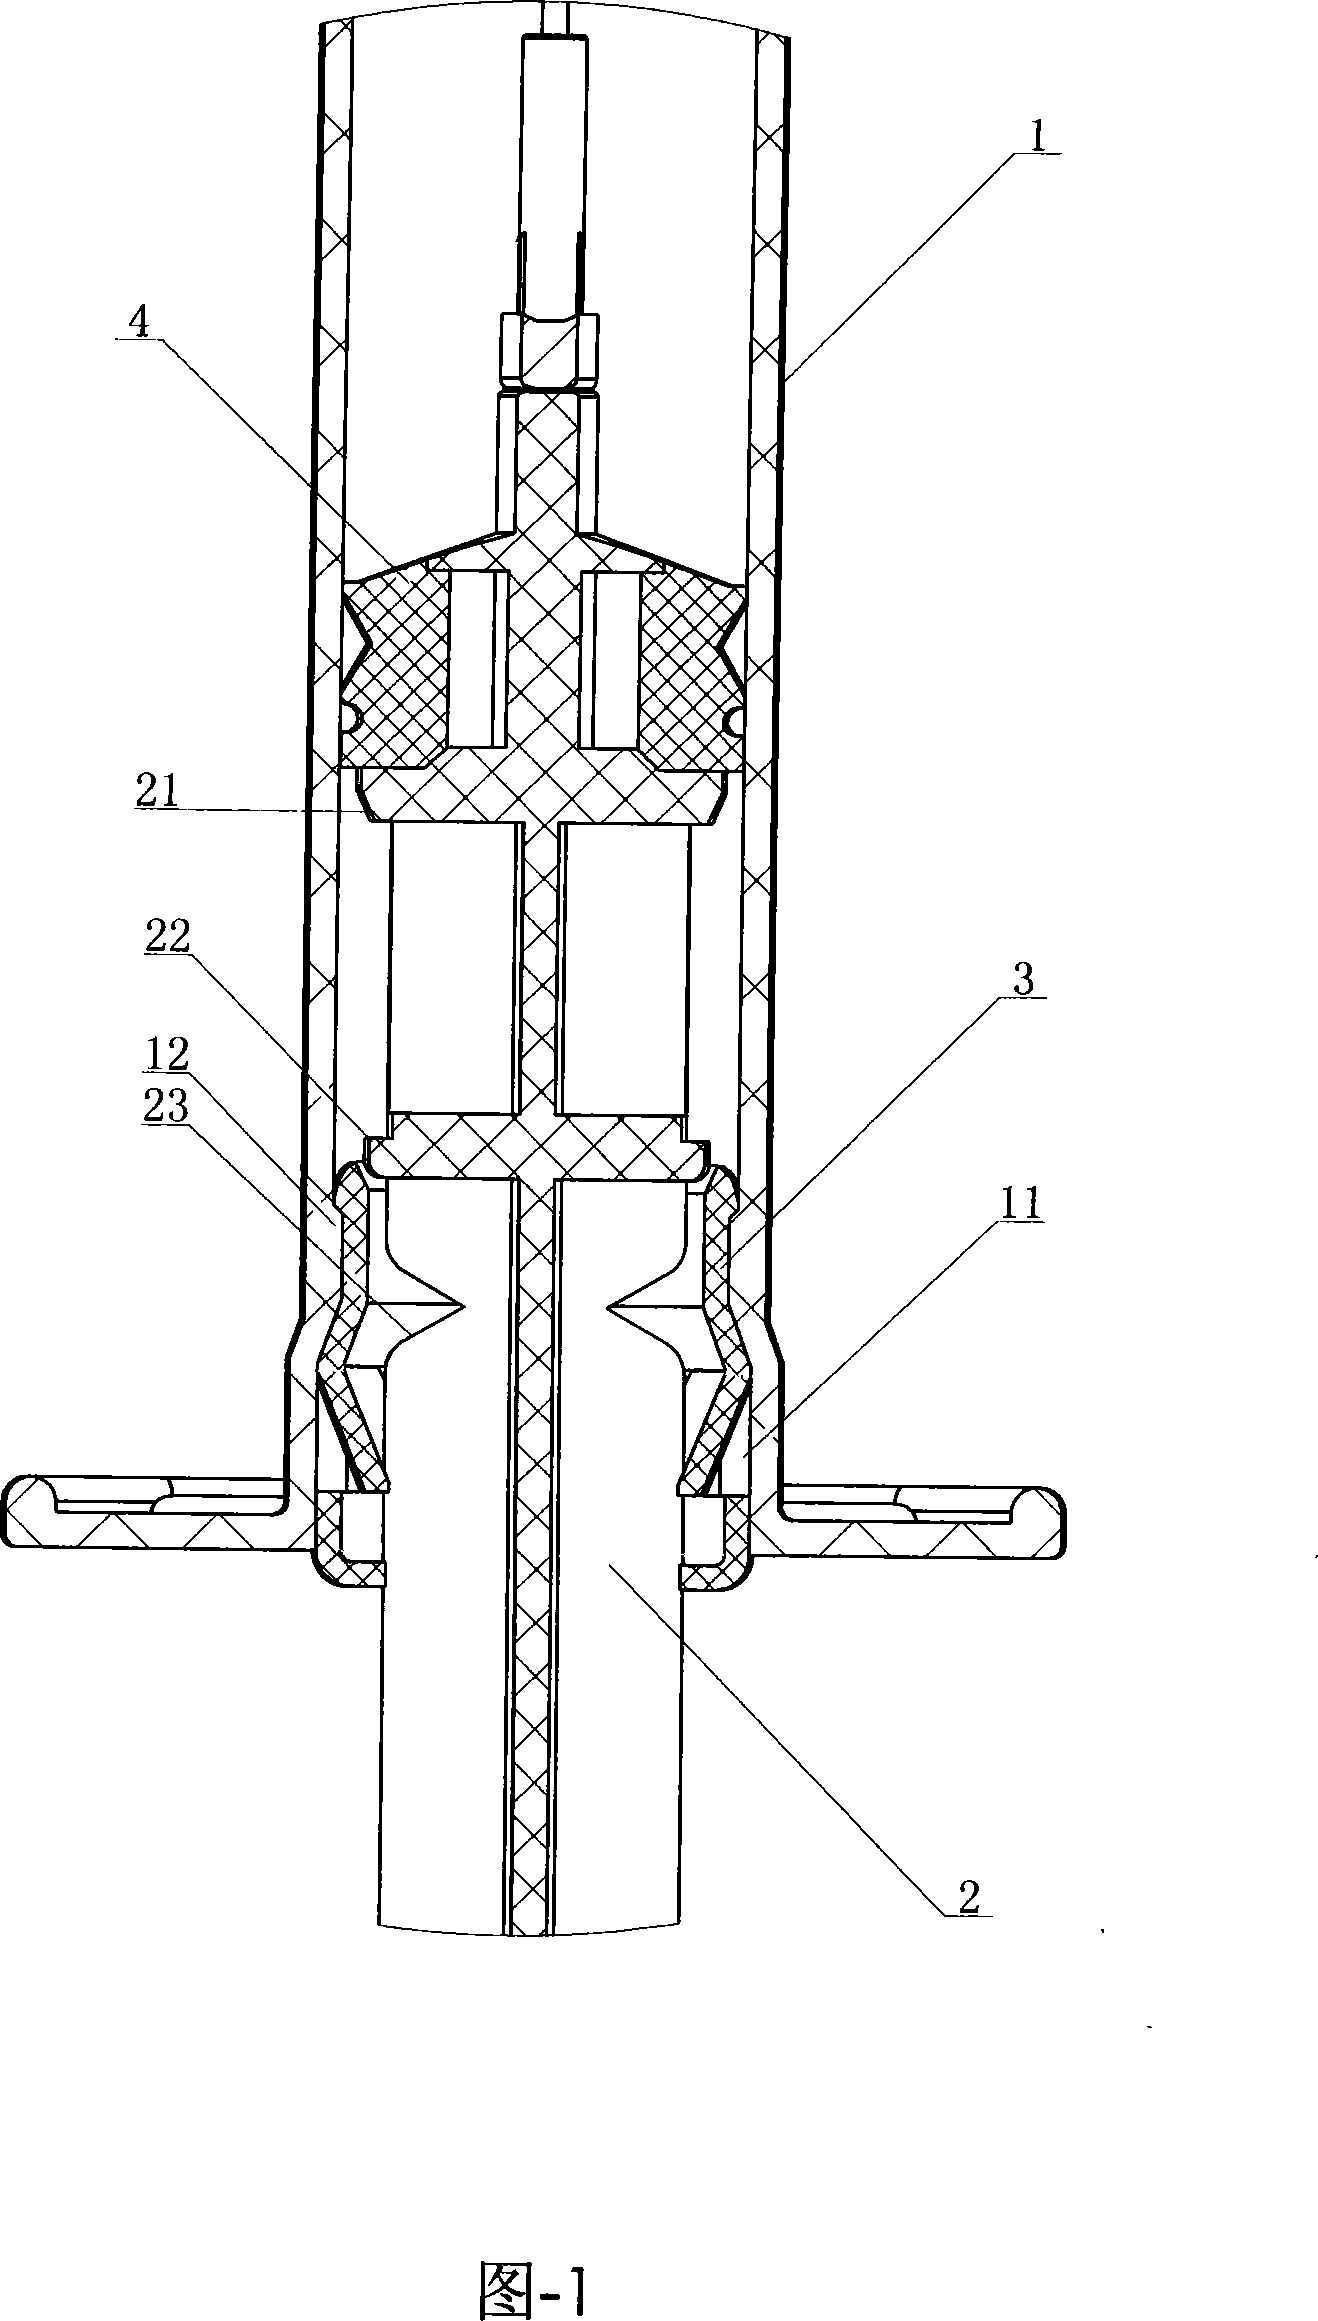 Safety injector core bar lockup device